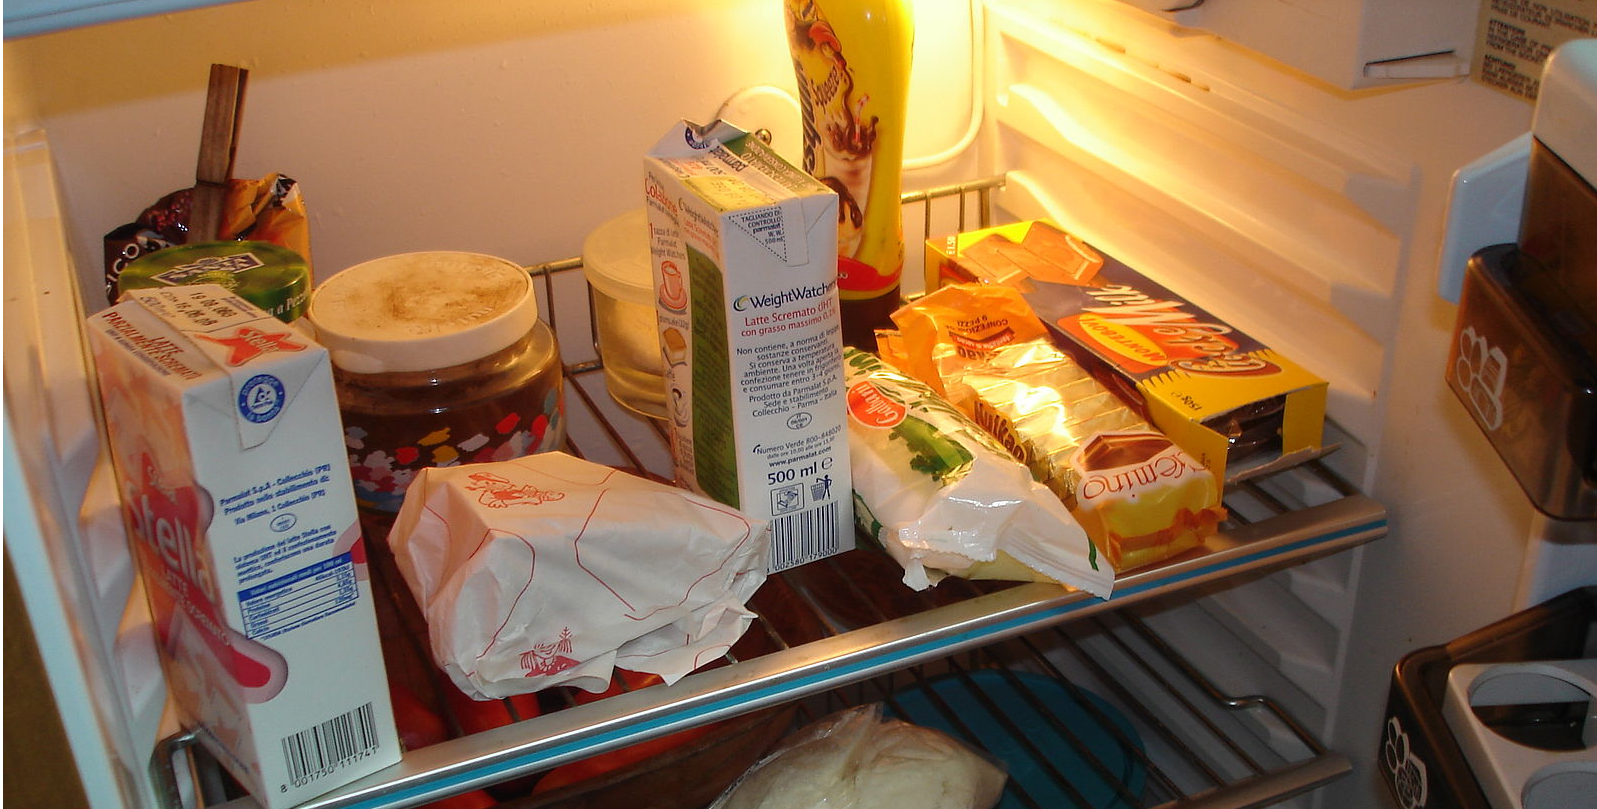 How To Solve A Leaky Refrigerator